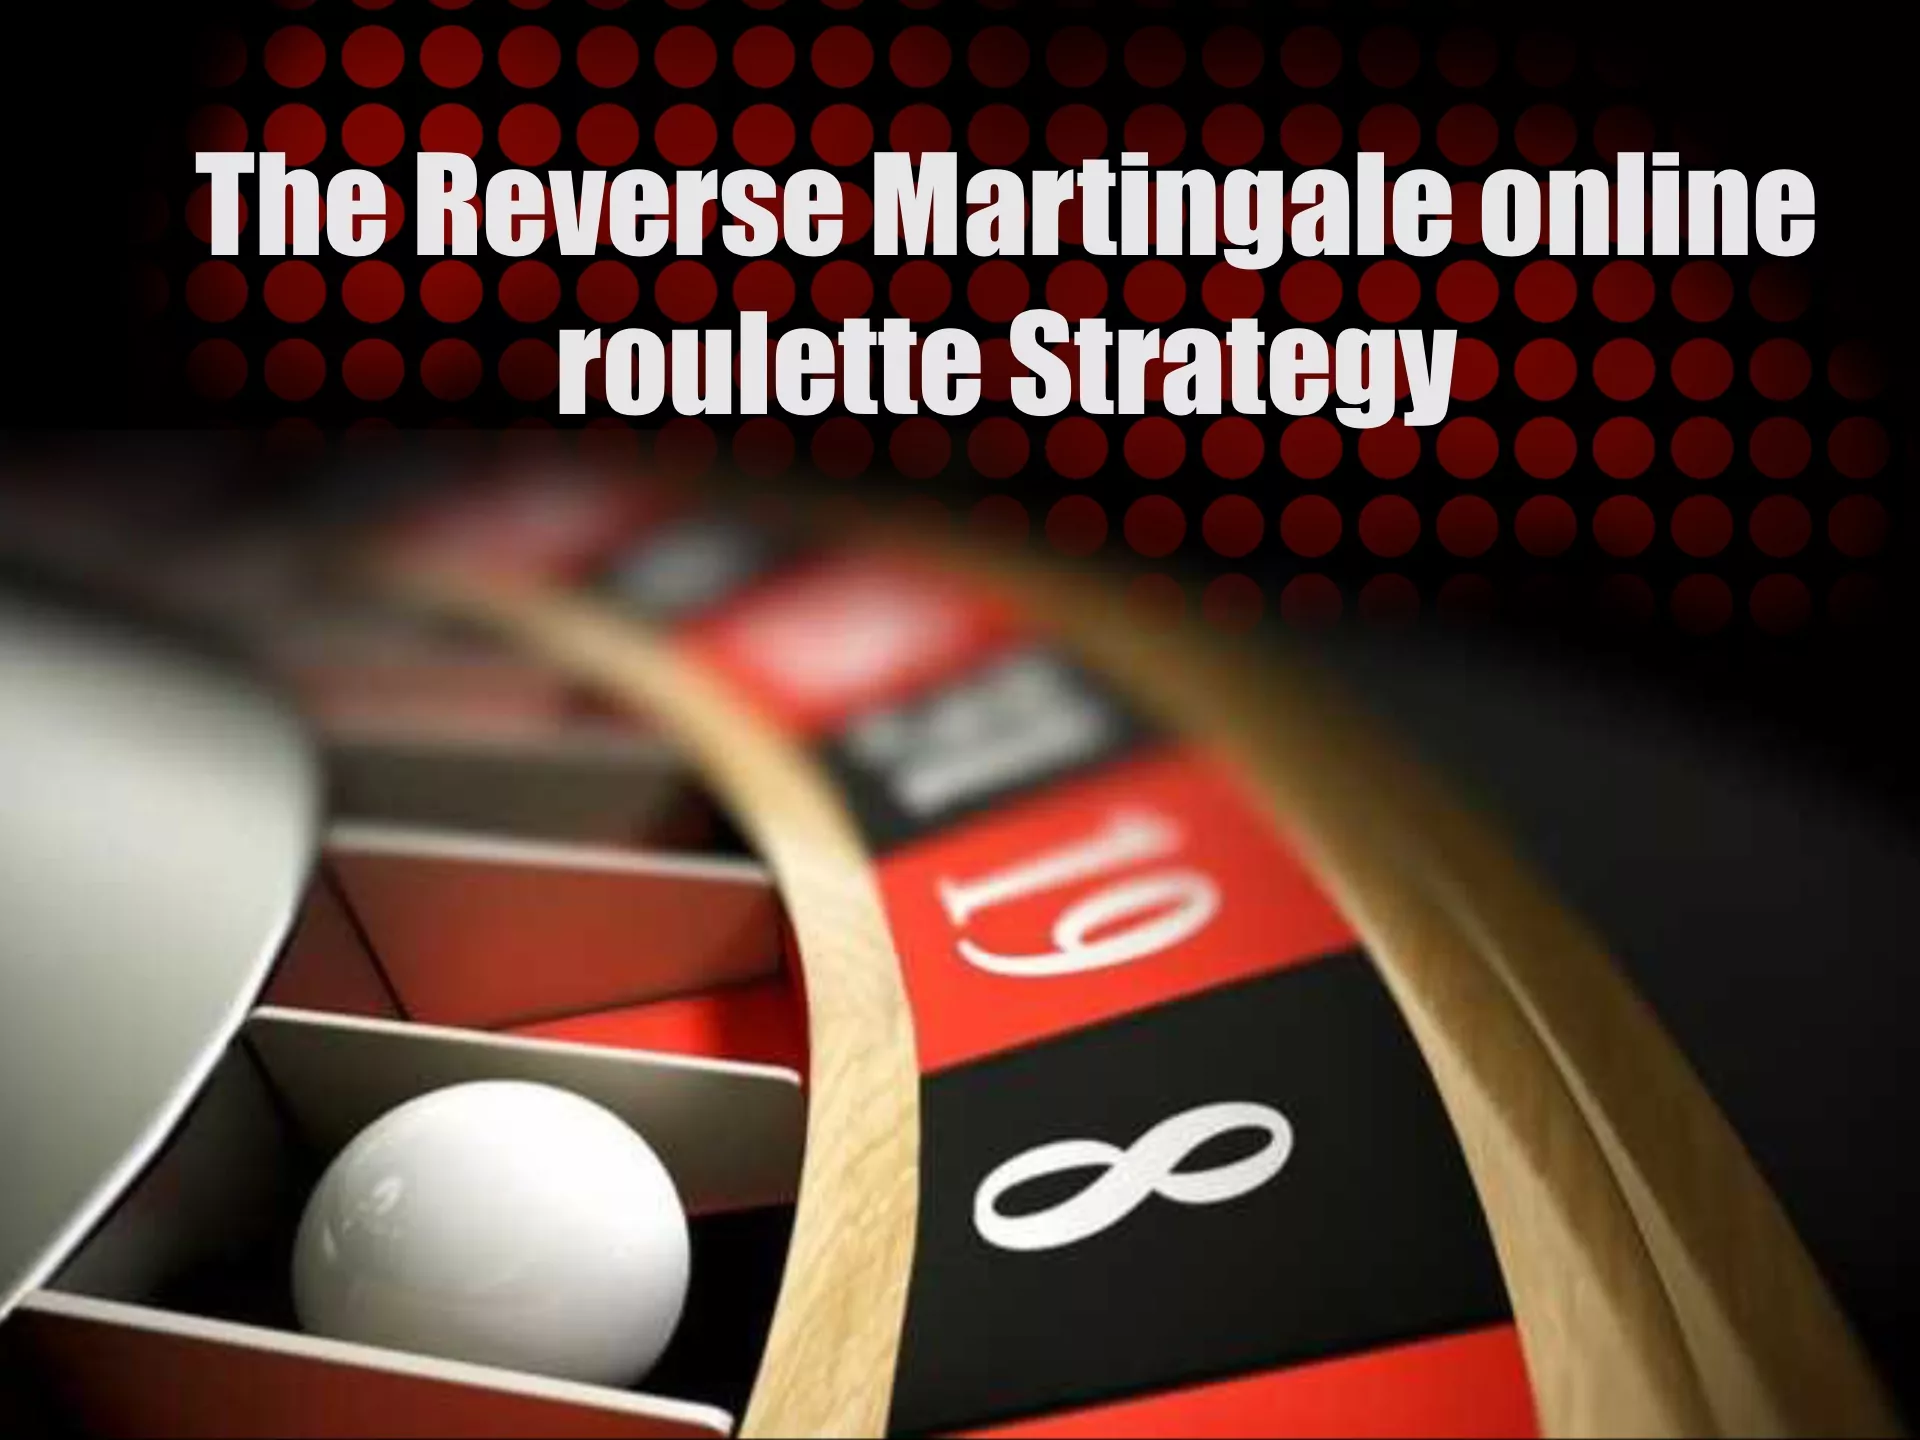 According to this strategy, the more you win, the more you should bet on online roulette.